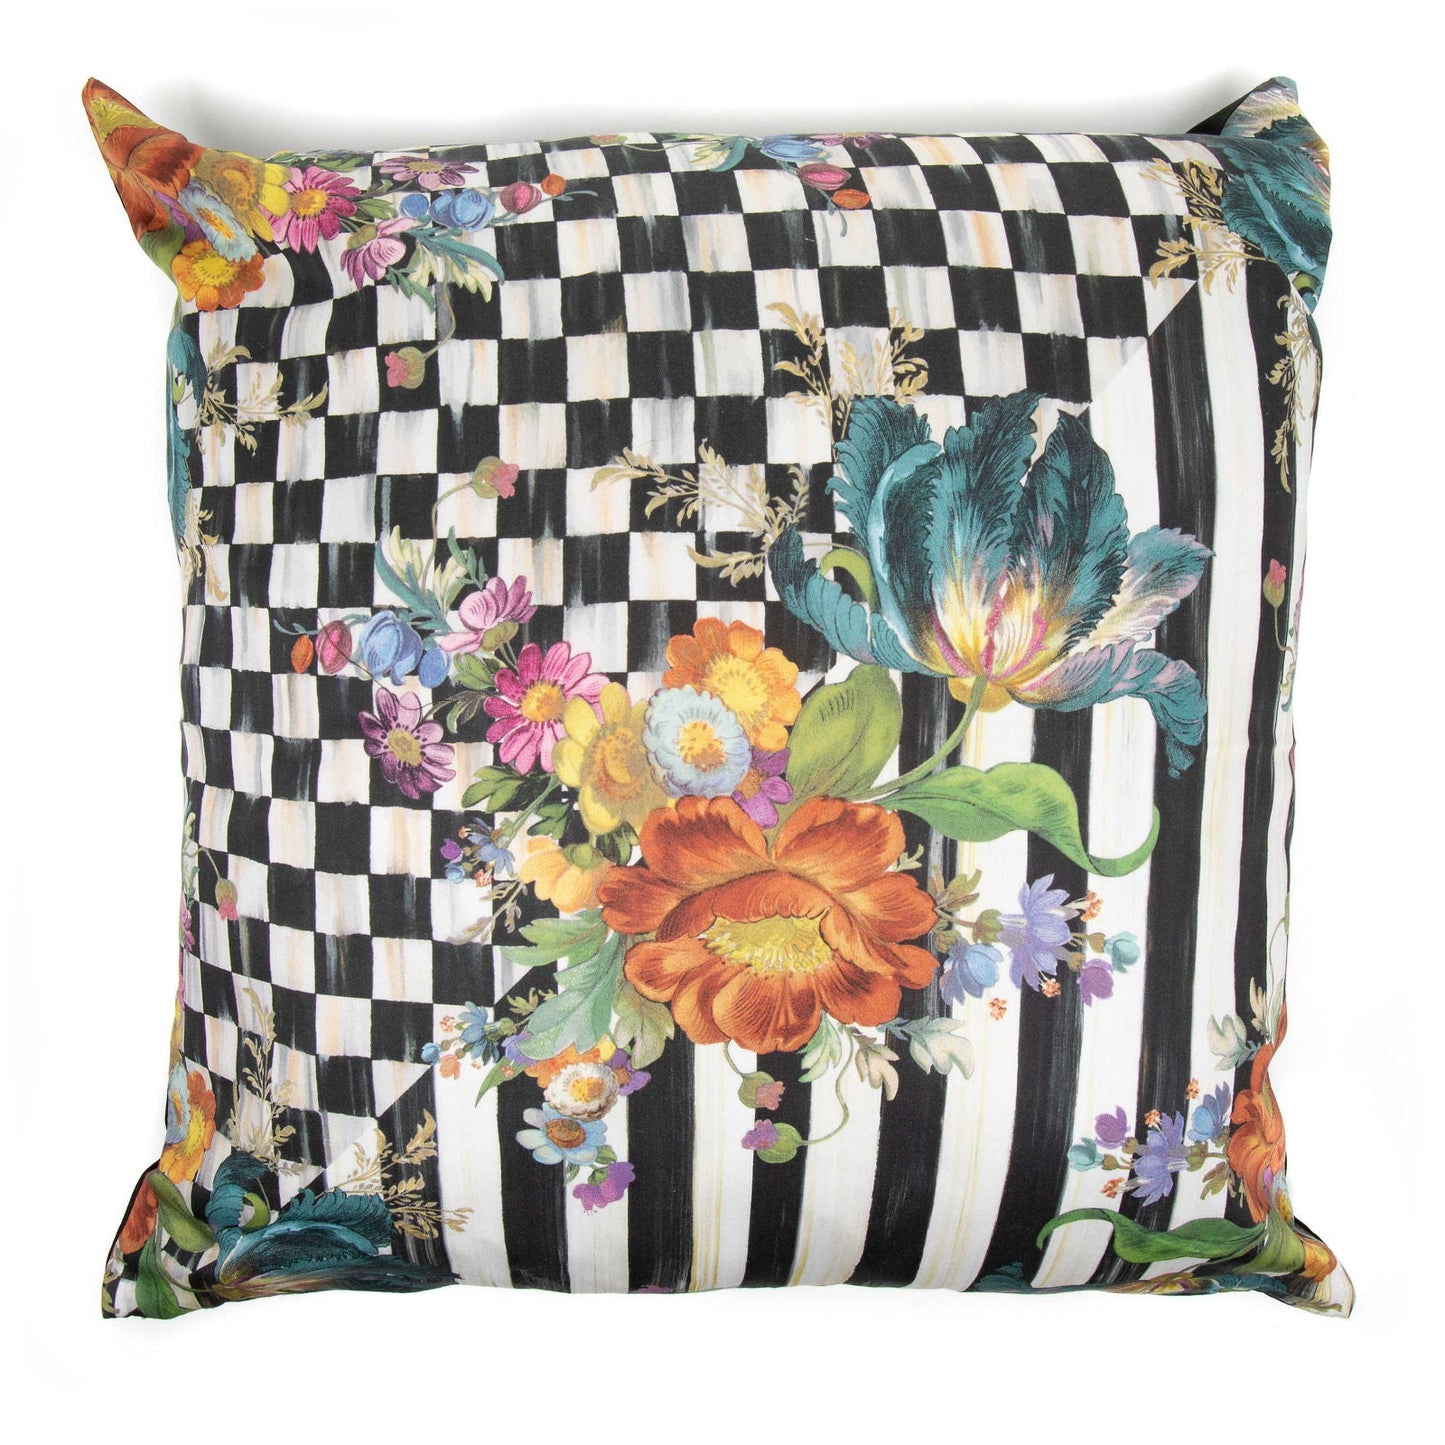 Courtly Flower Market Black and White Pillow by Mackenzie-Childs - |VESIMI Design| Luxury and Rustic bathrooms online